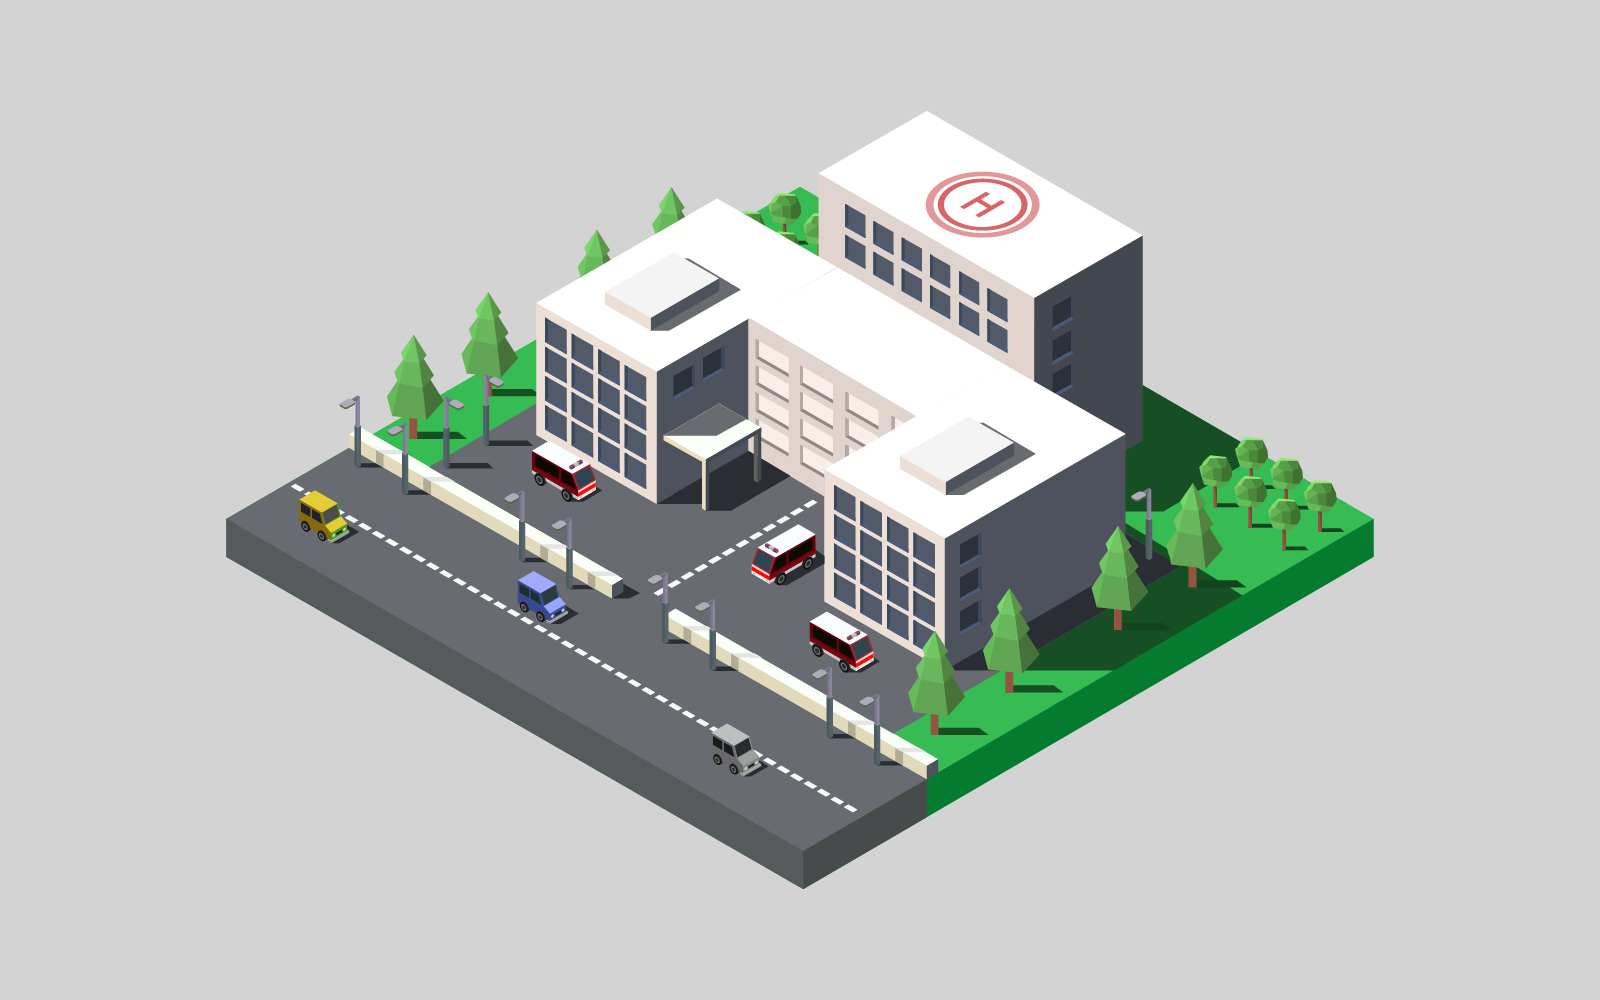 Isometric hospital illustrated in vector on a white background